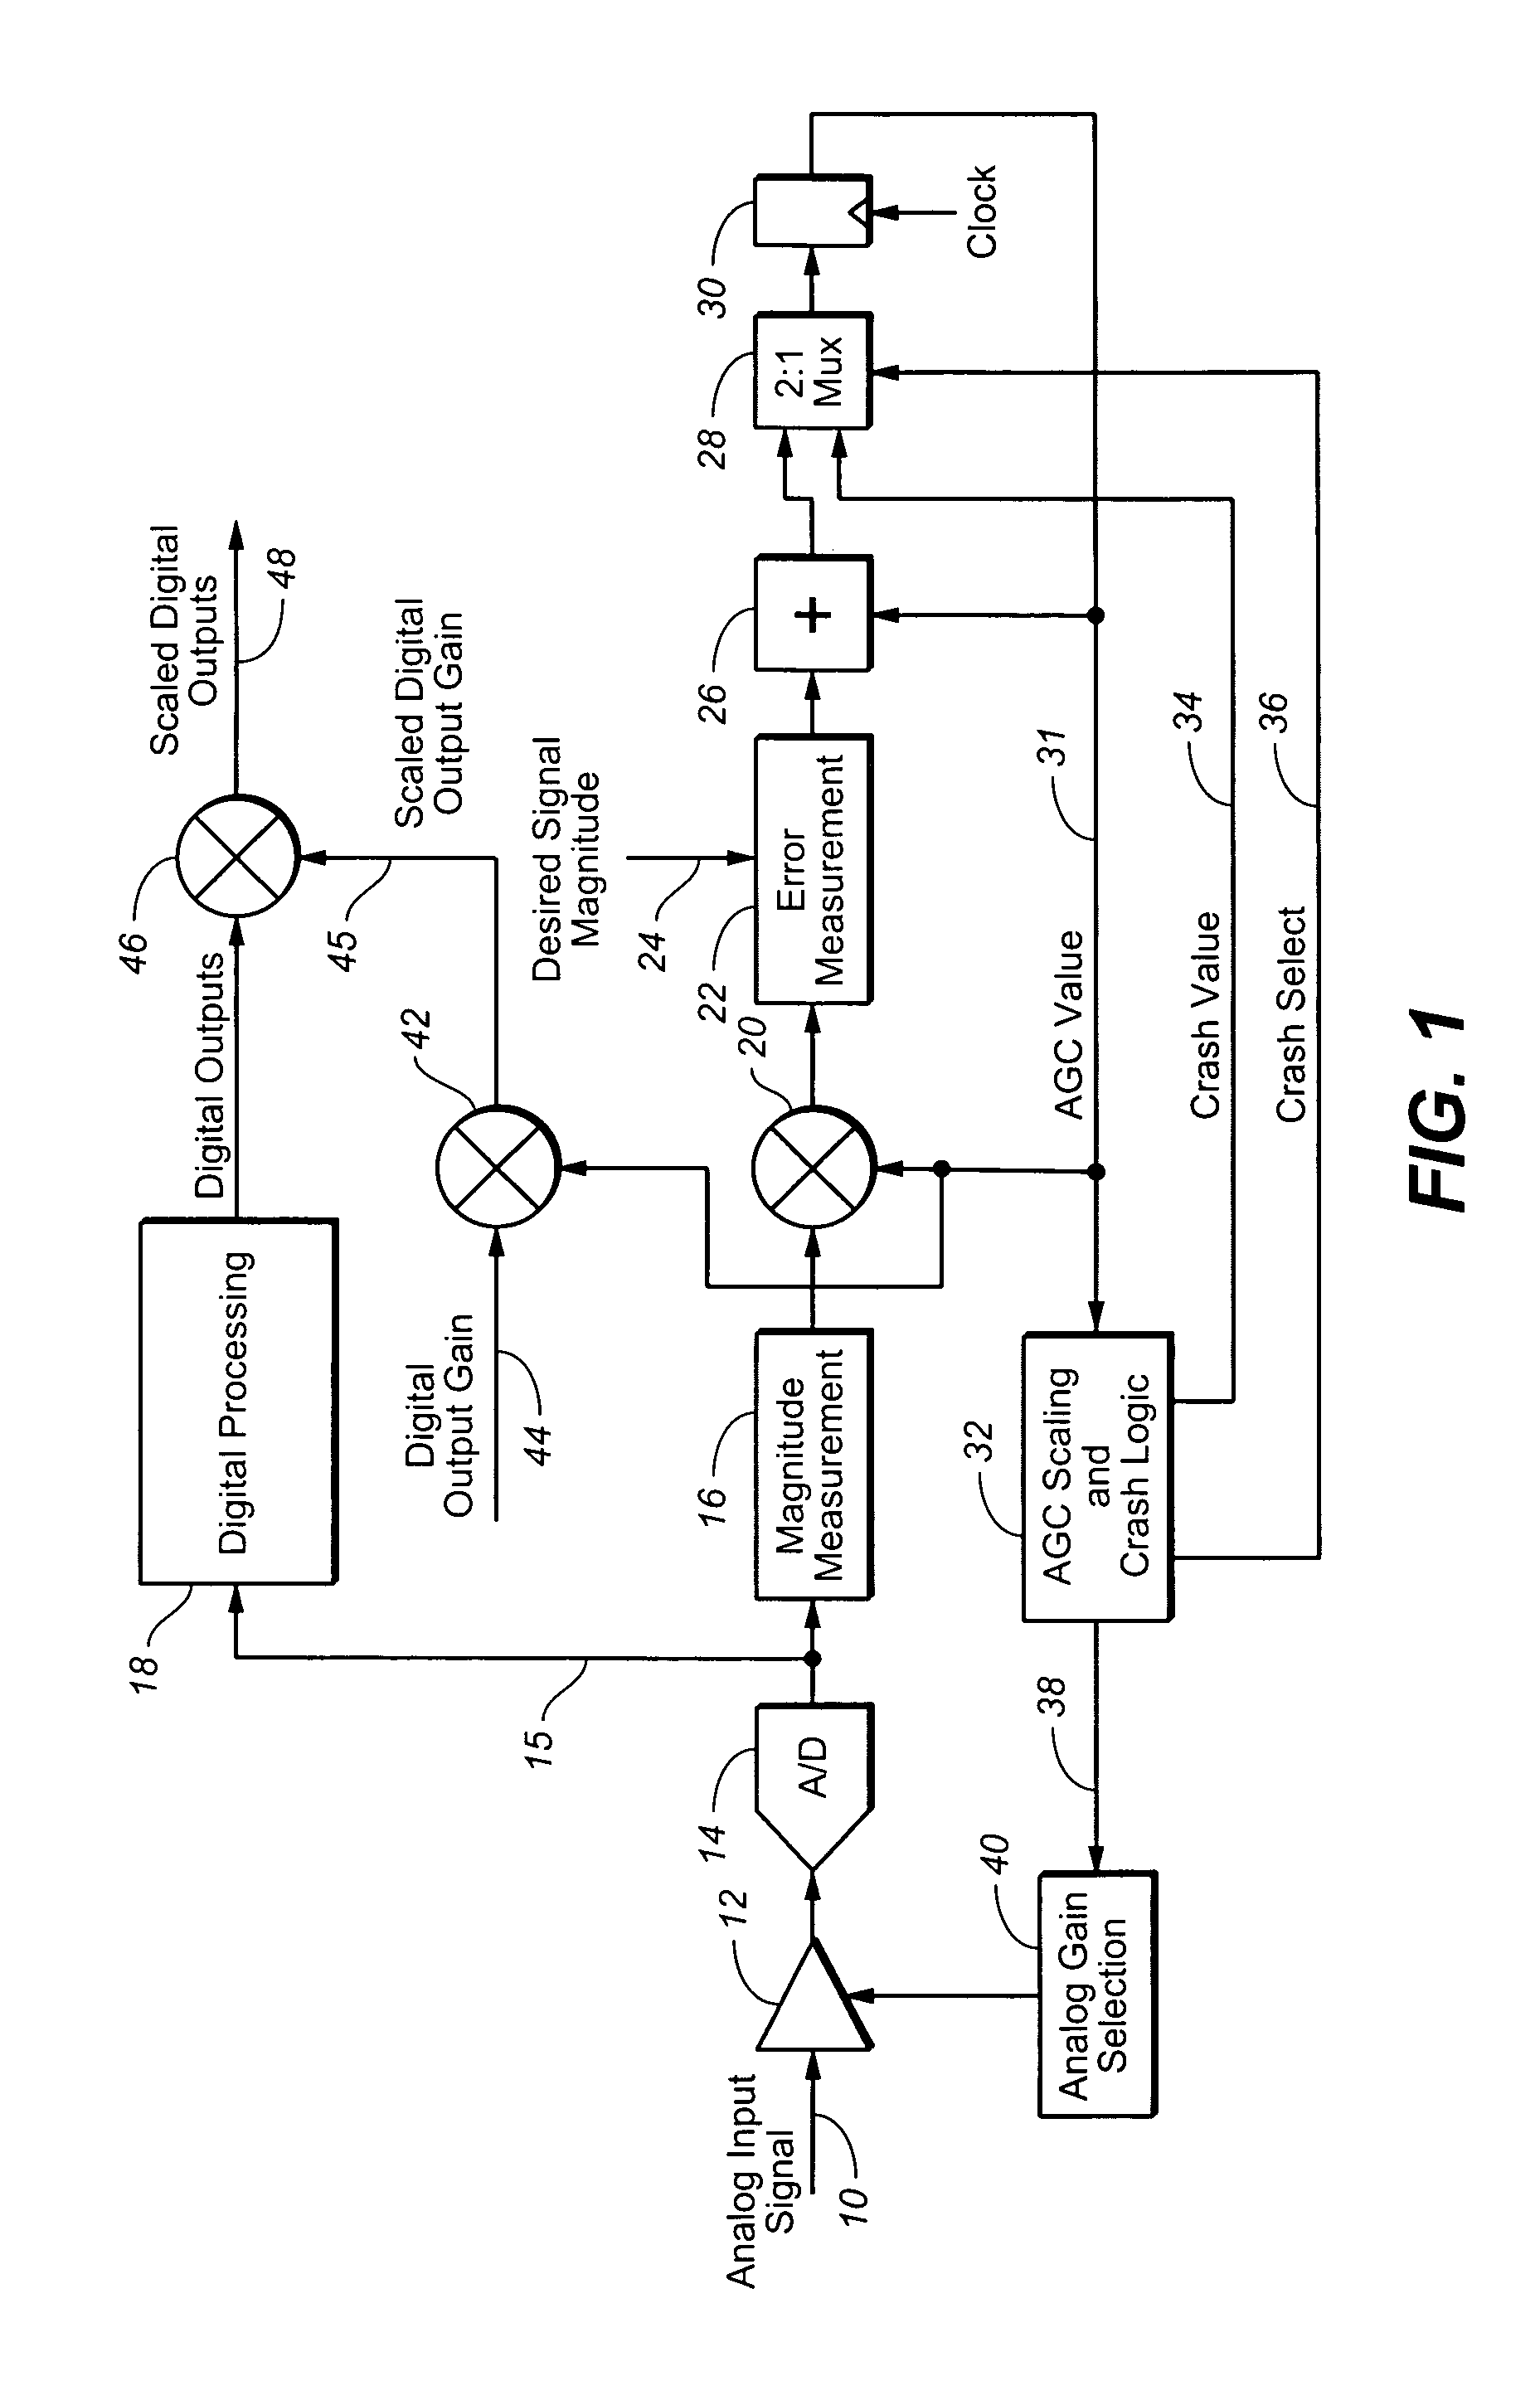 Automatic gain control with analog and digital gain